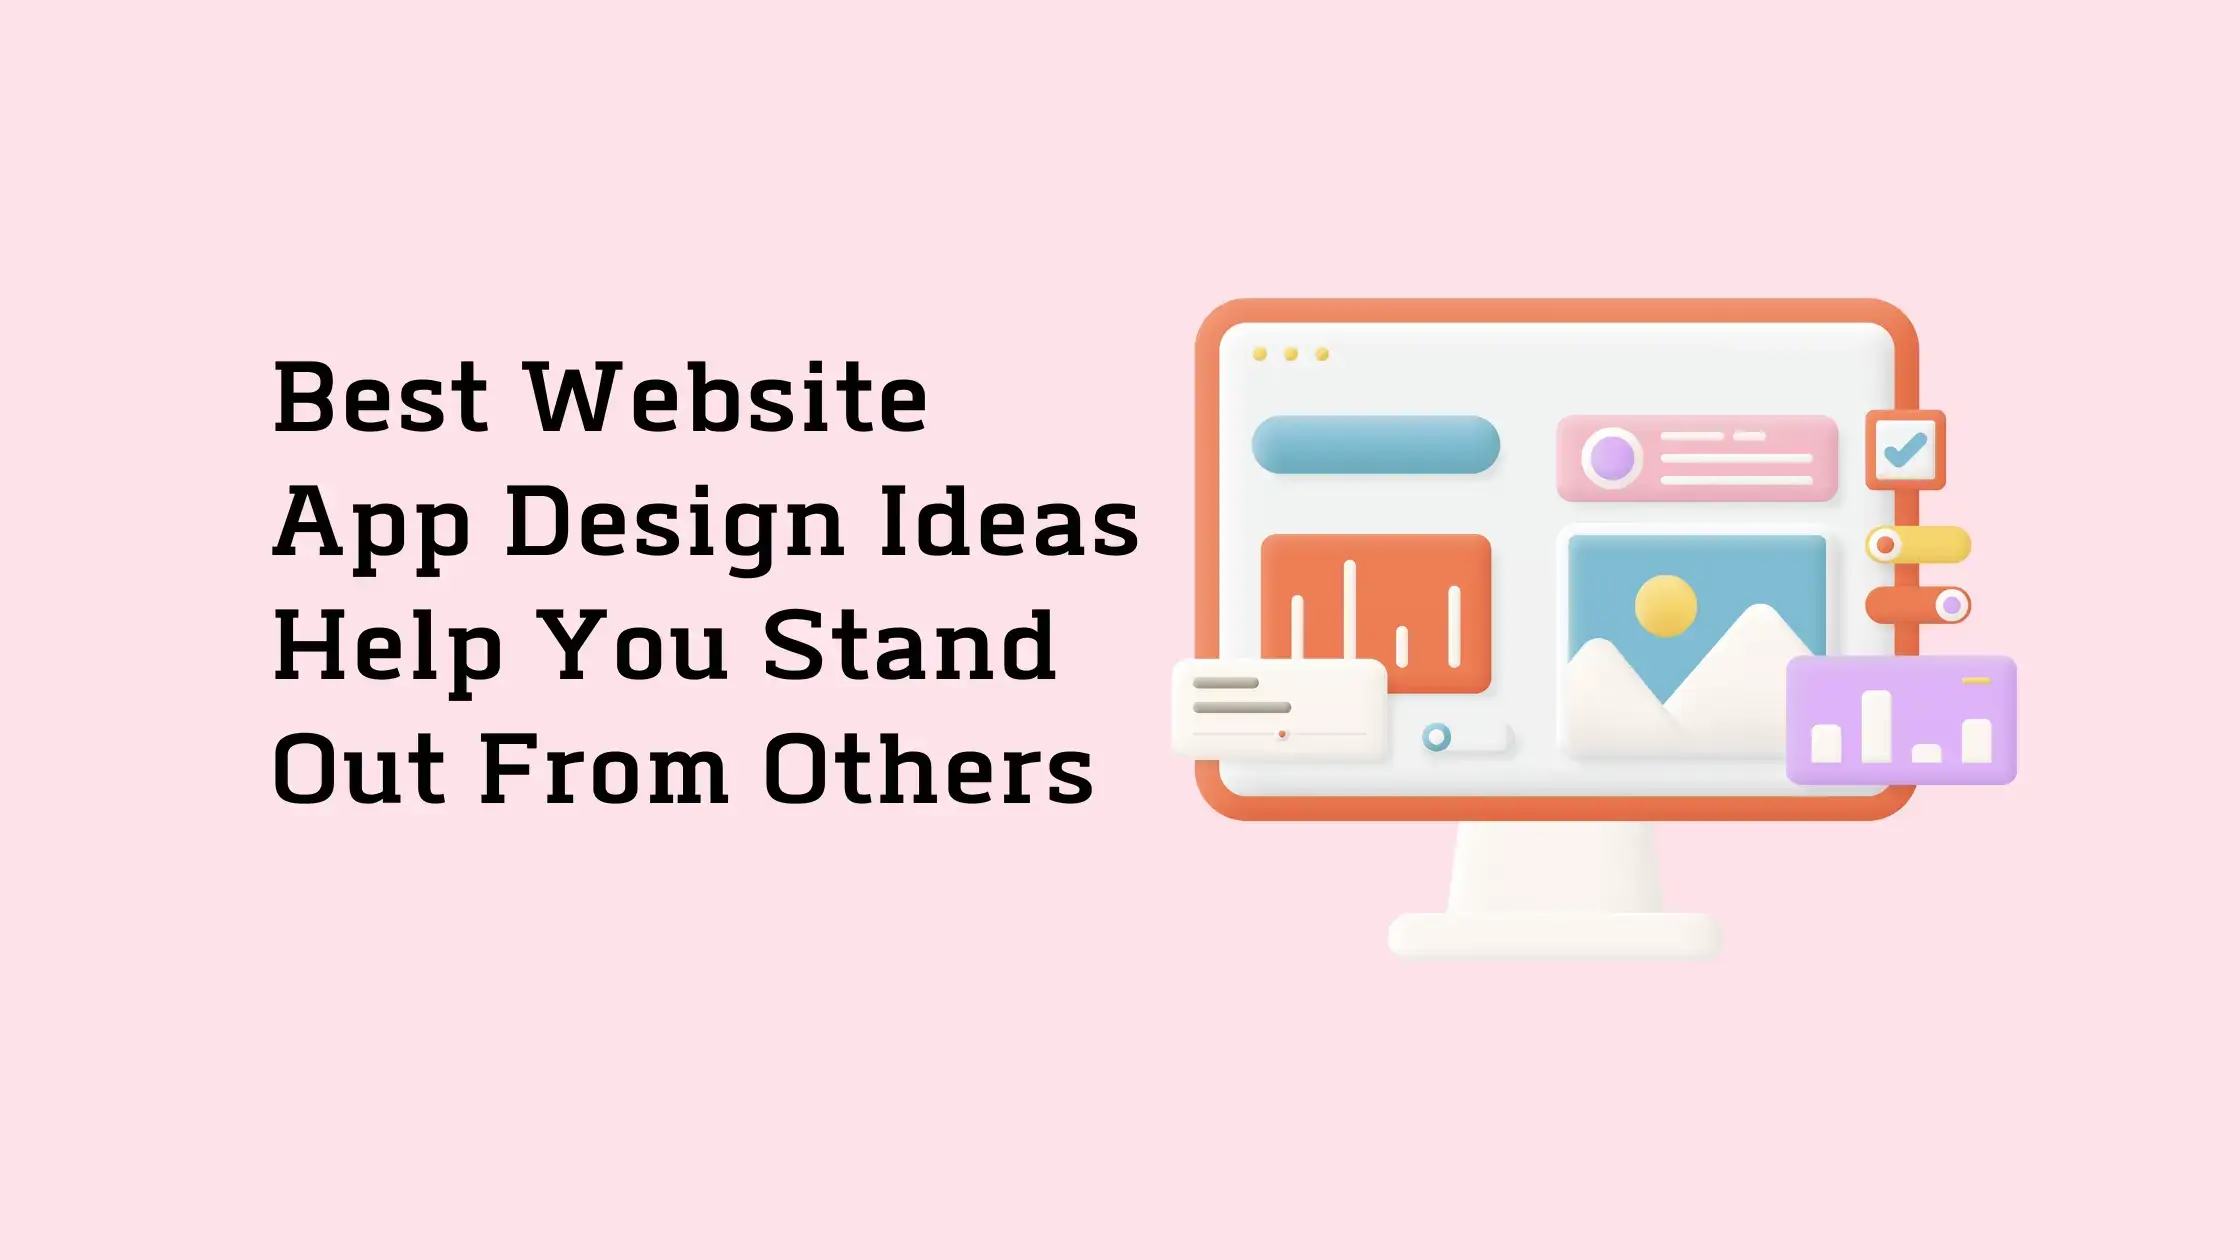 Best-Website-App-Design-Ideas-Help-You-Stand-Out-From-Others